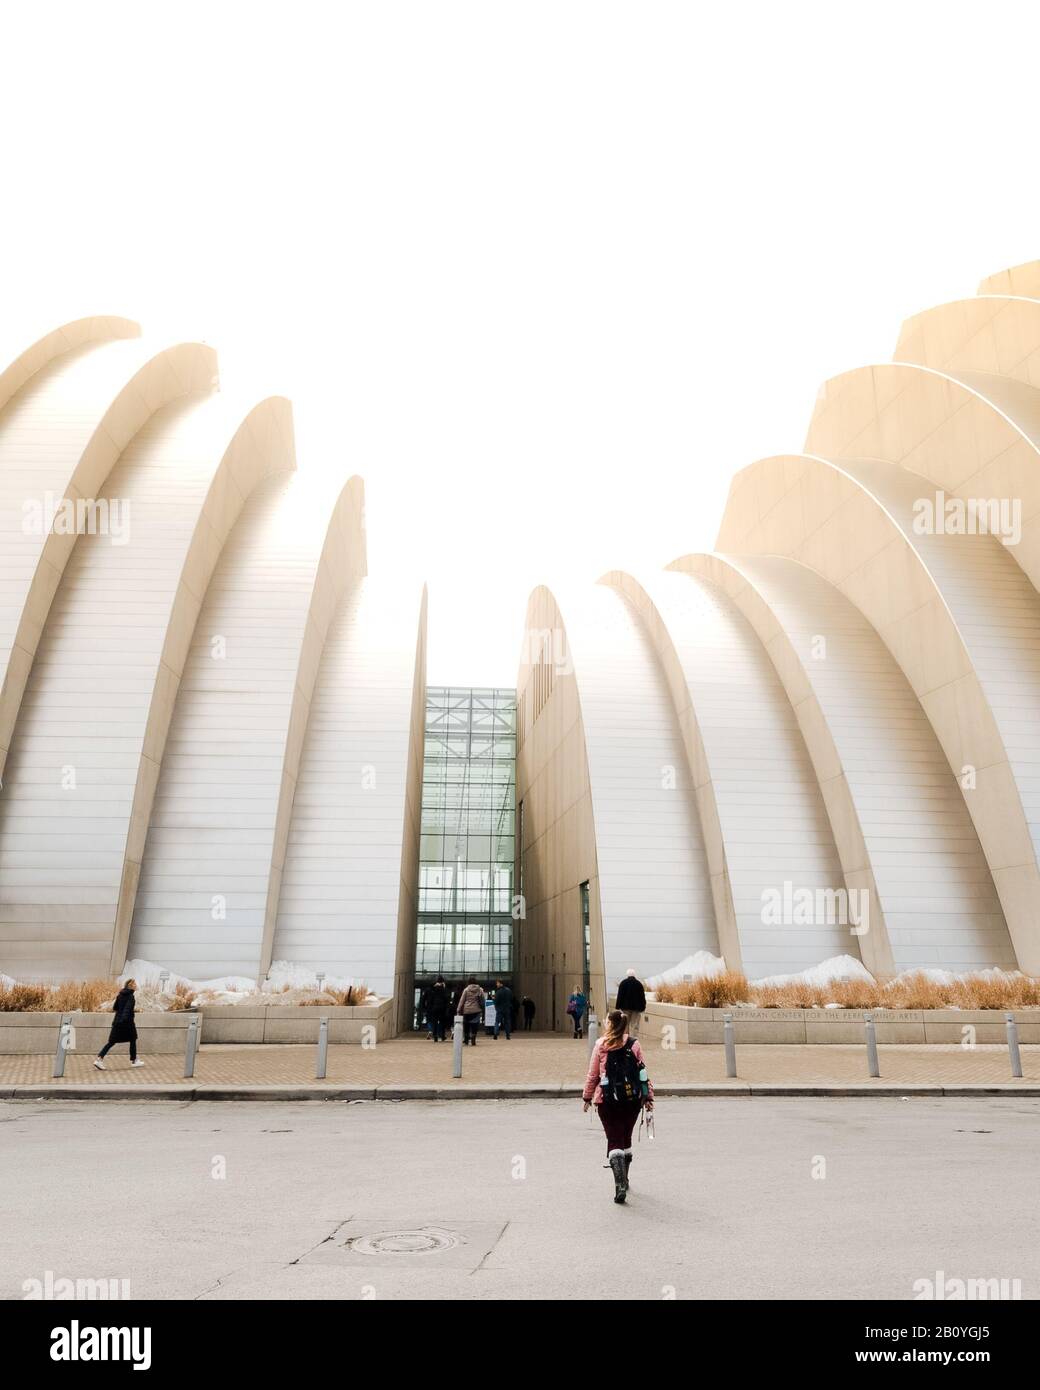 Kauffman Center for the Performing Arts building entrance with a person walking in the street in Kansas City, MO Stock Photo